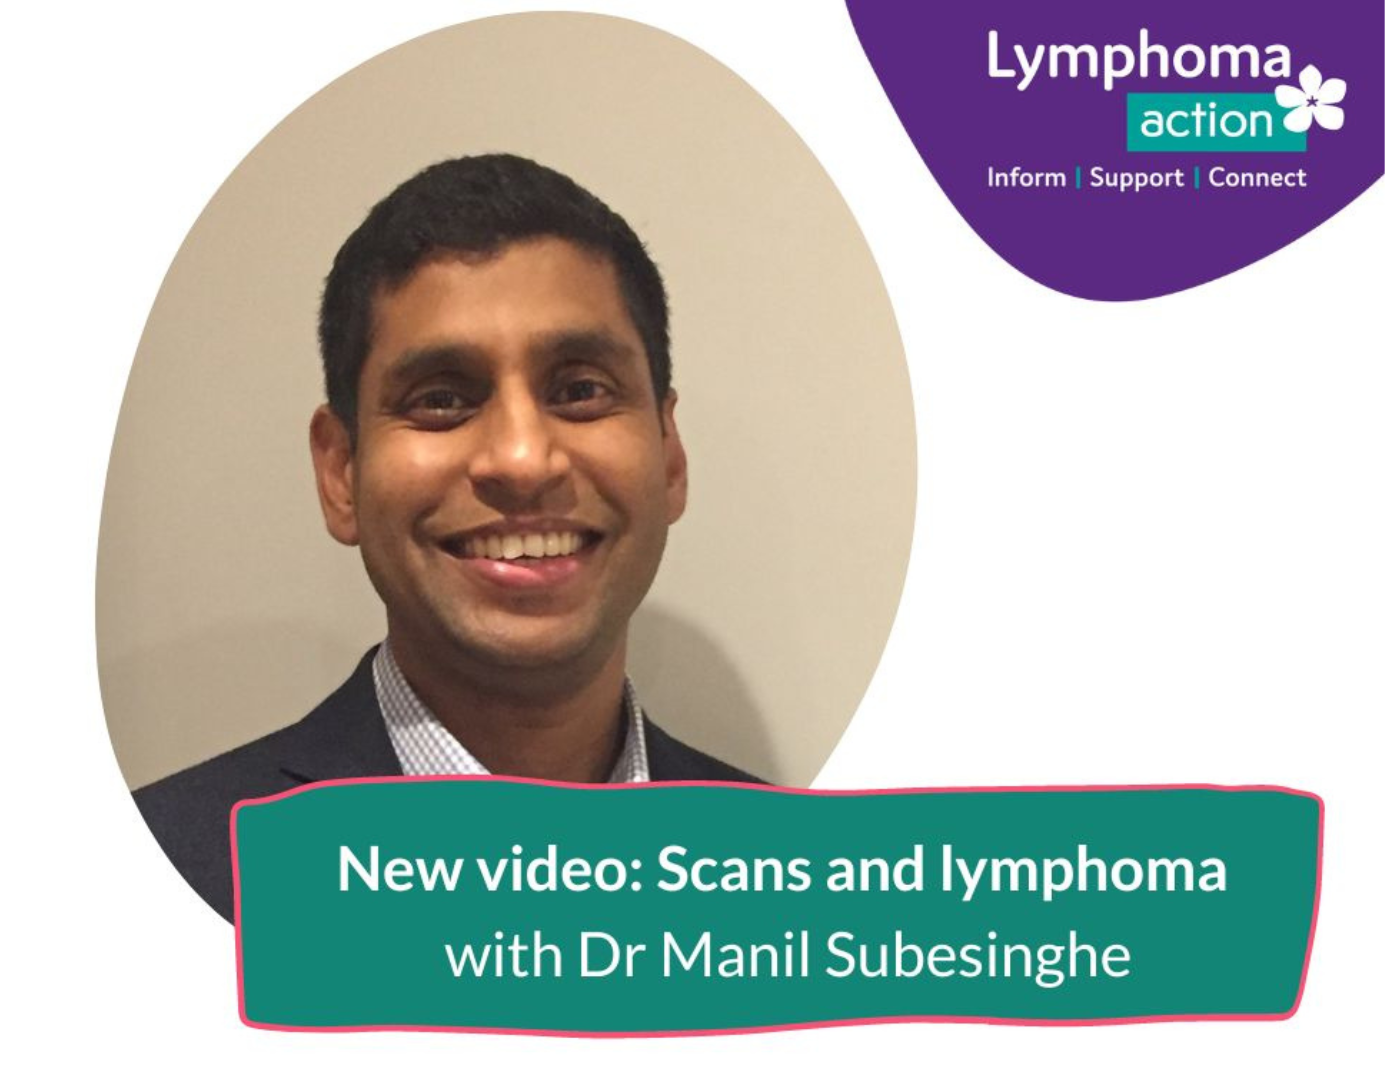 Dr Manil Subesinghe talks about scans and imaging